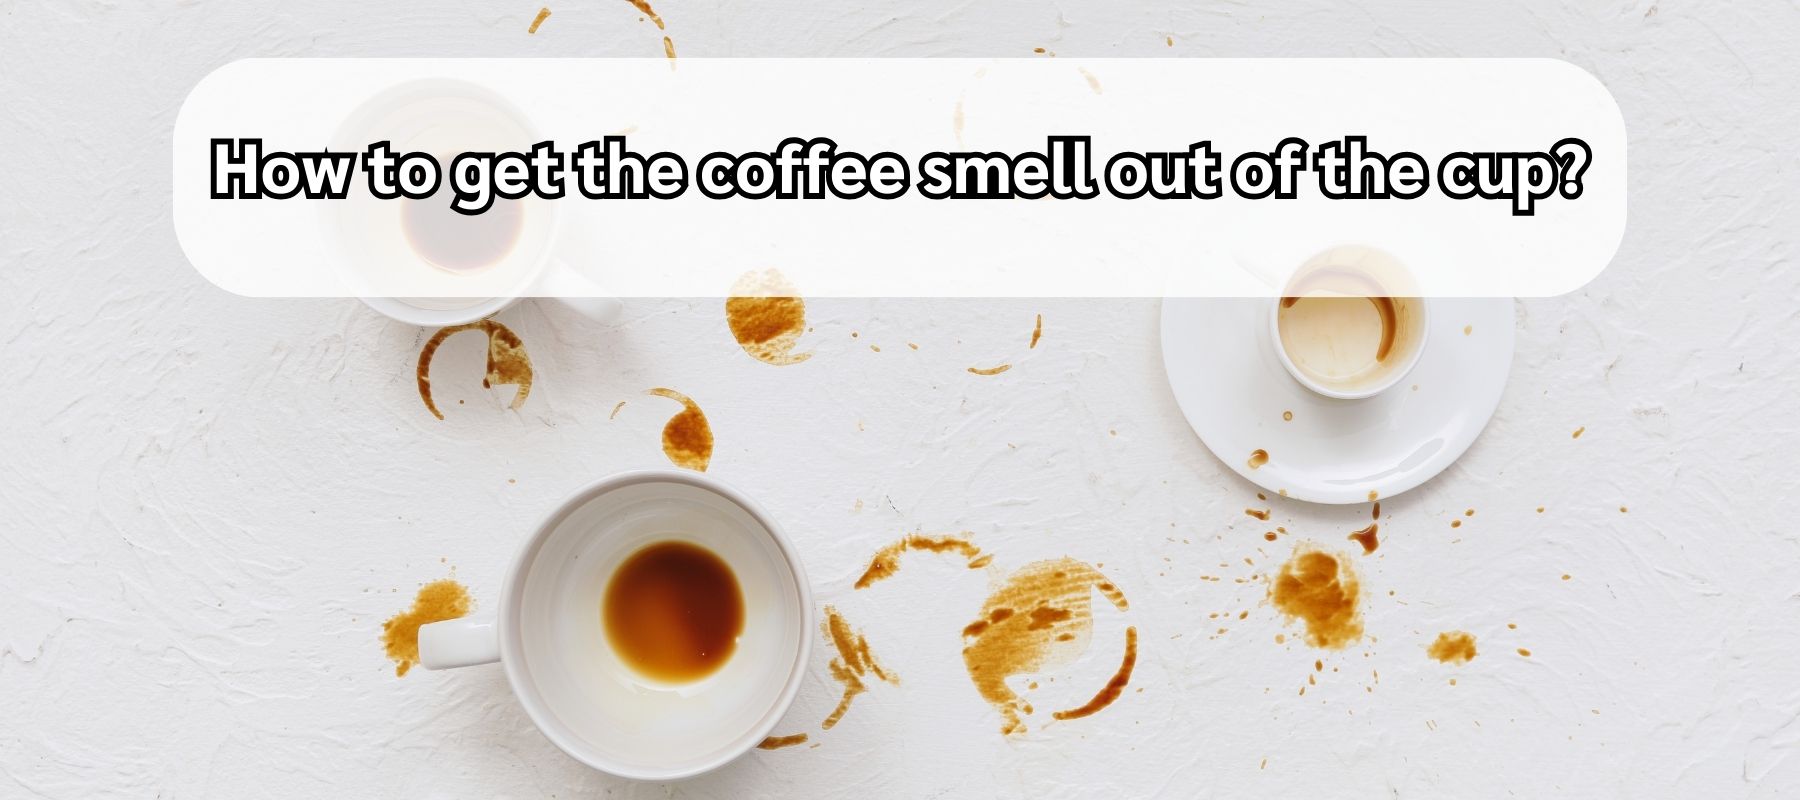 How-to-get-the-coffee-smell-out-of-the-cup?